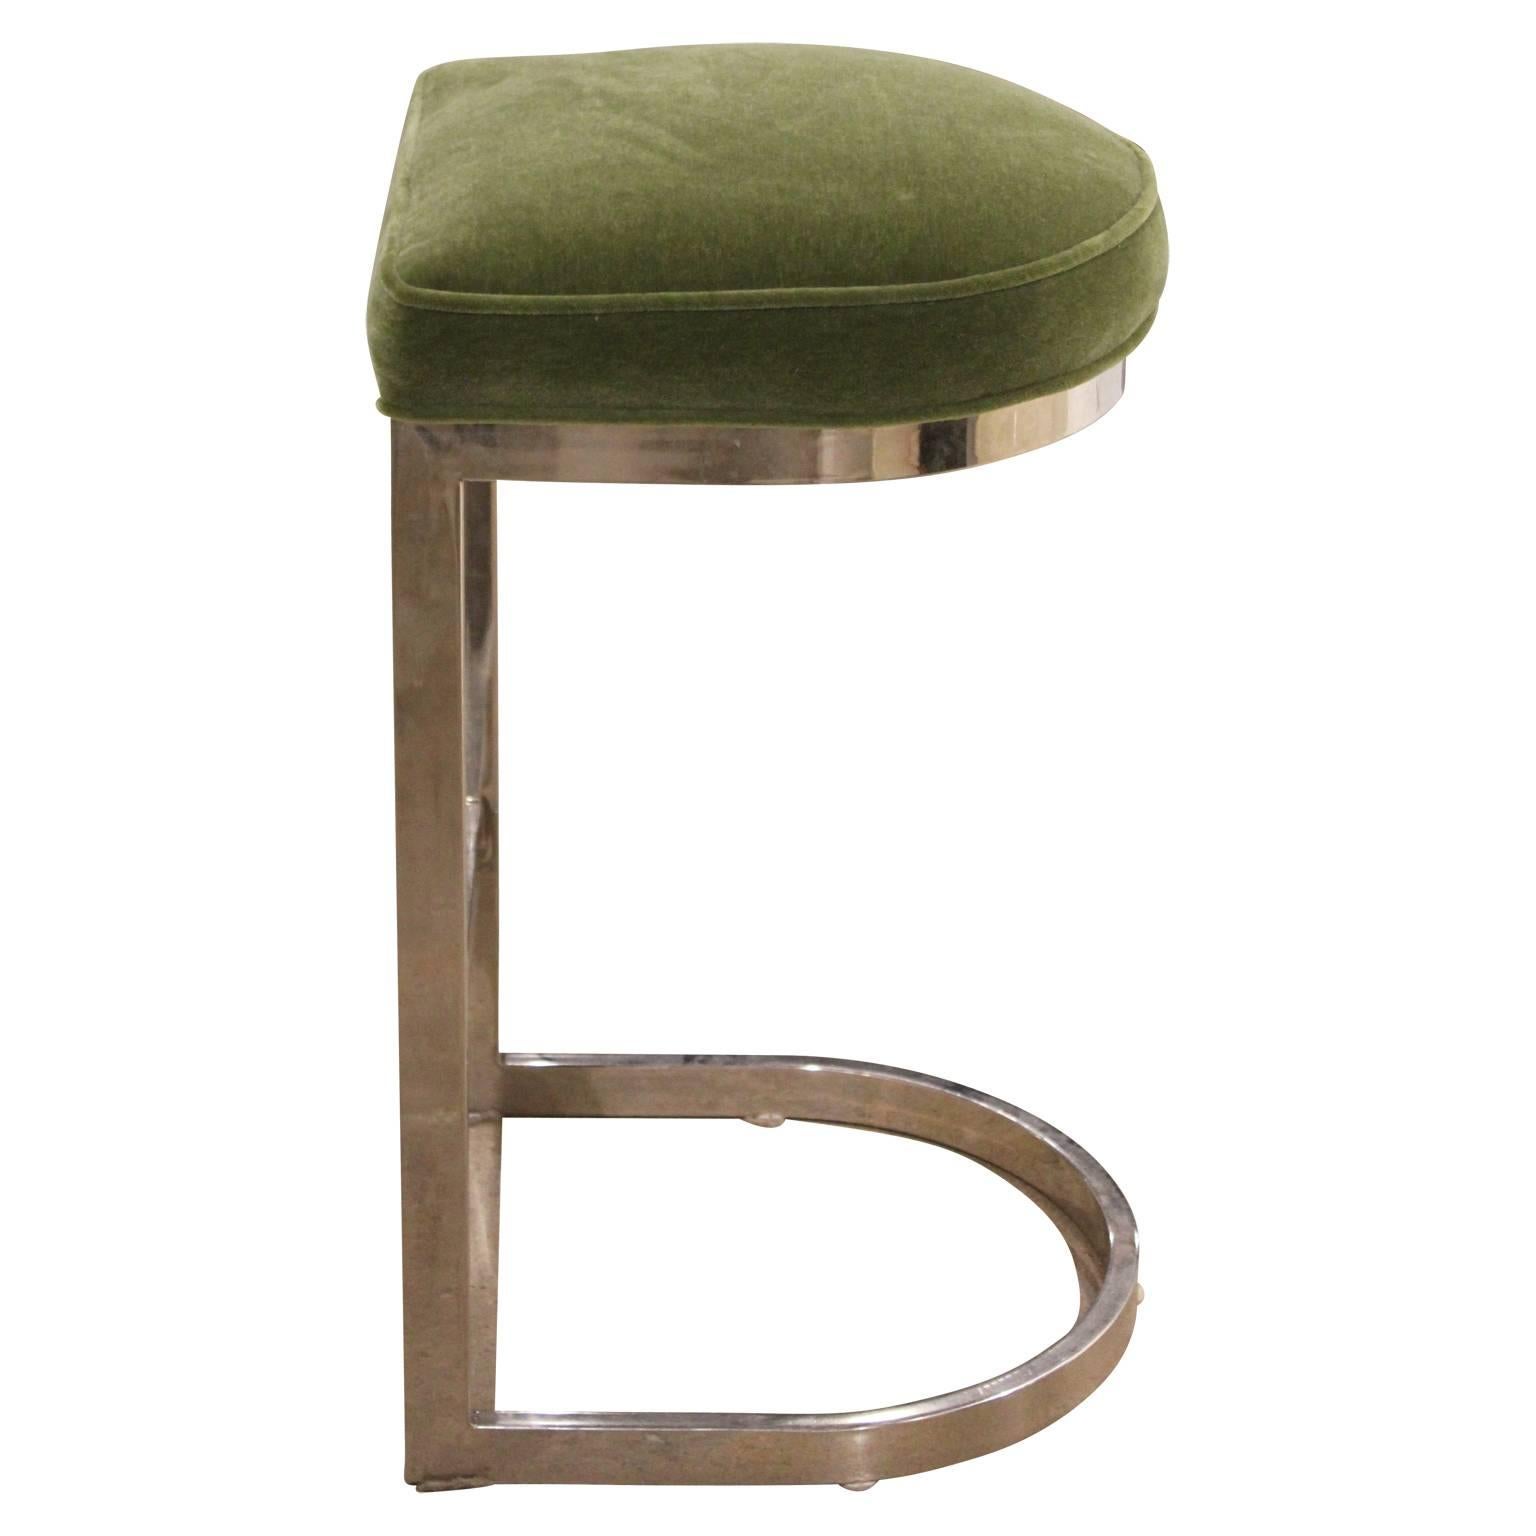 Set of three gorgeous chrome and green mohair cantilevered bar stools by Milo Baughman.